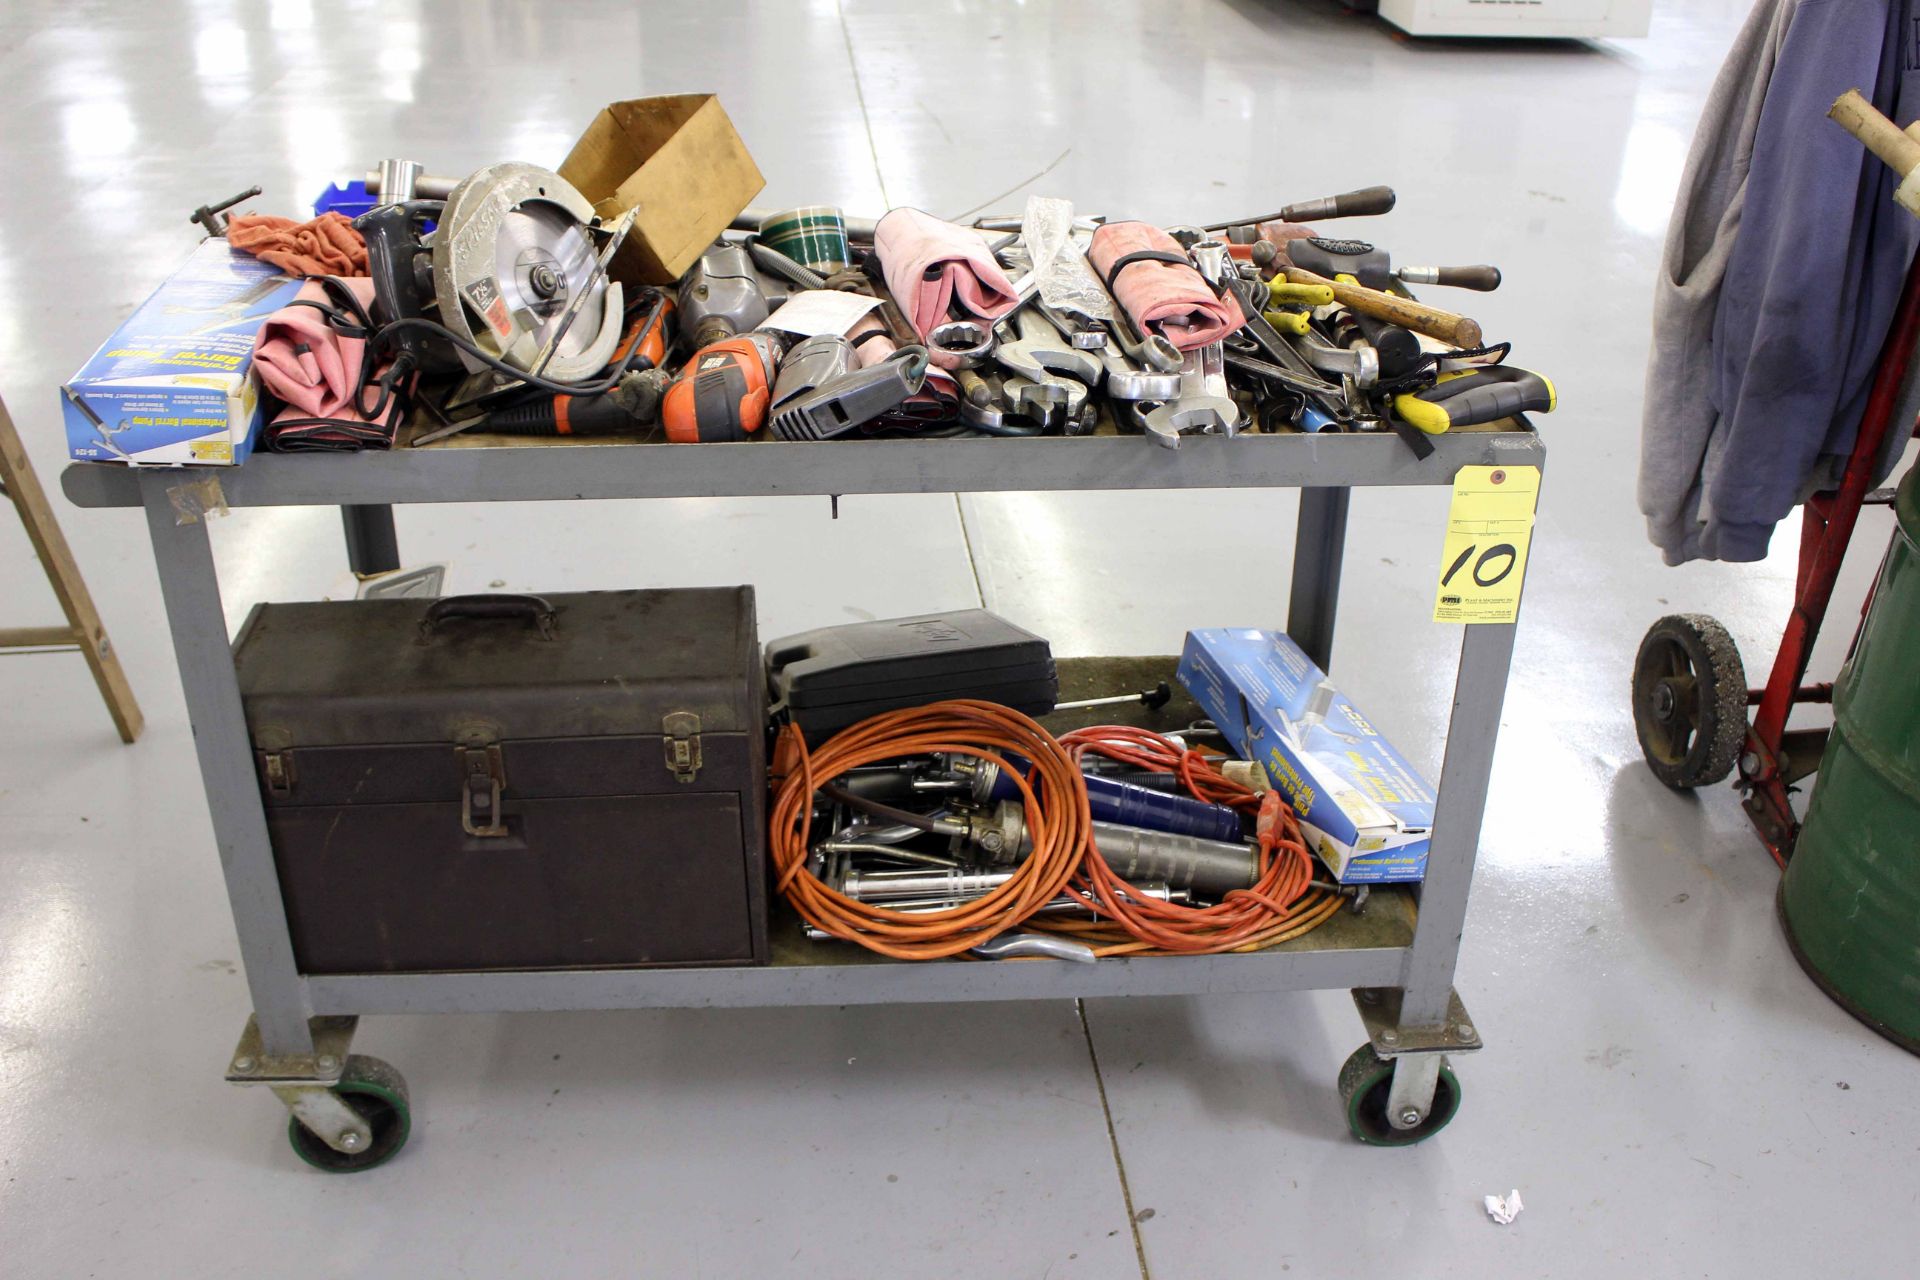 LOT OF TOOLS, misc. (on shop cart)